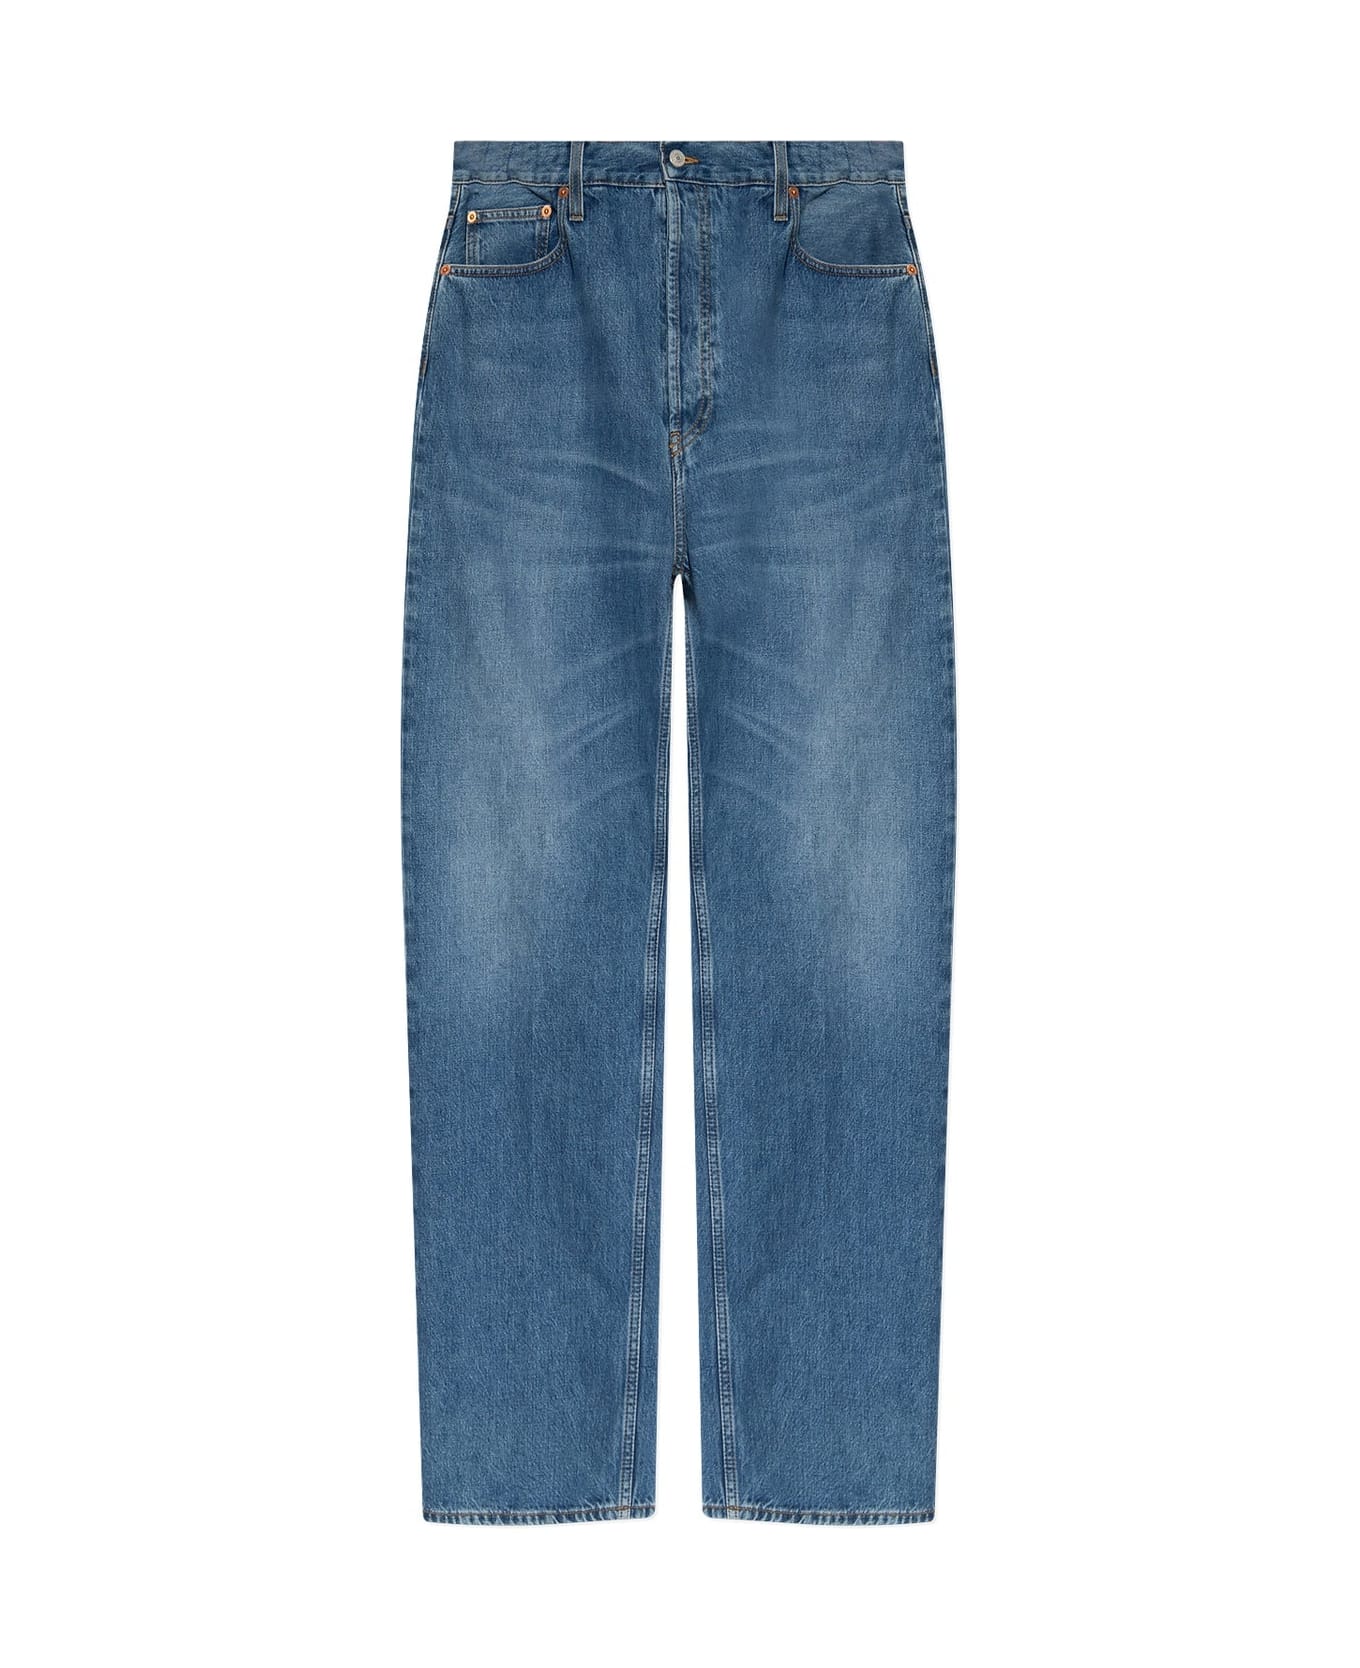 Gucci Relaxed-fitting Denim Jeans - Blue